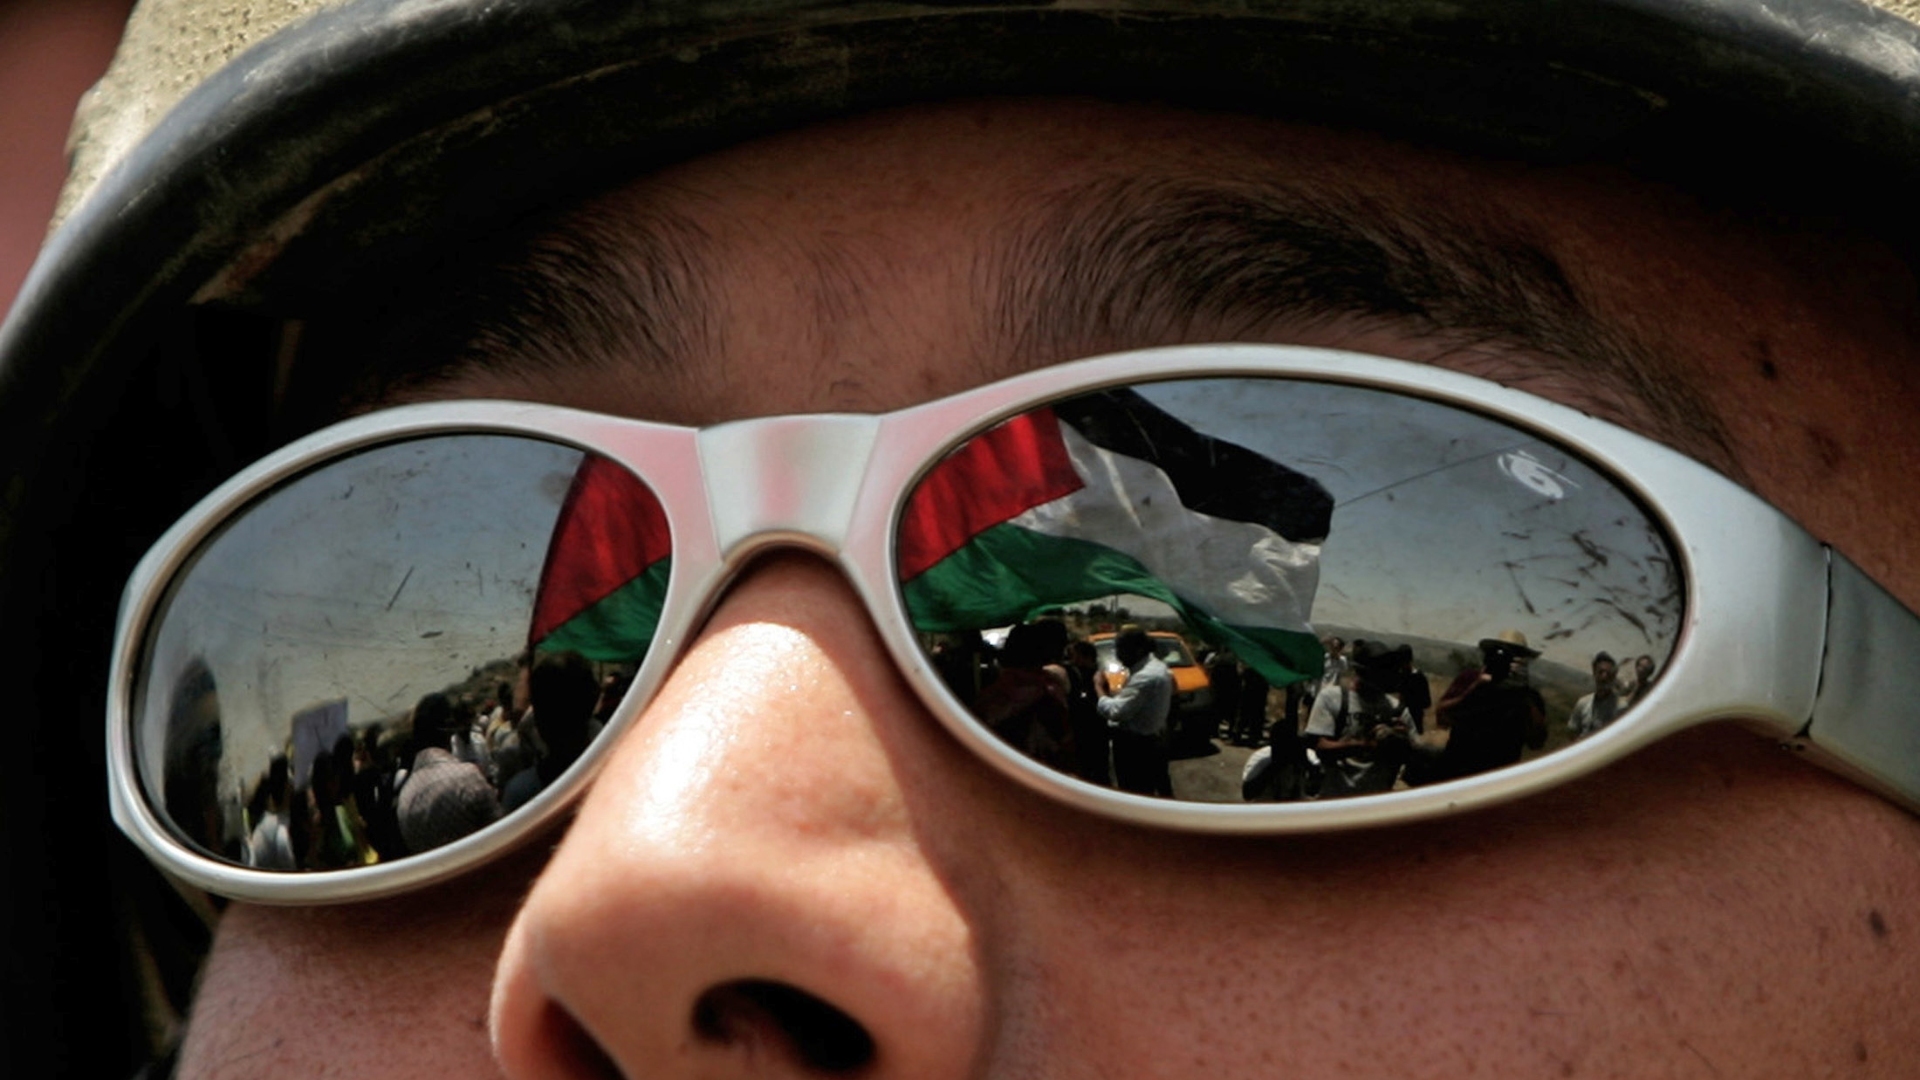 How do Palestinians factor into Israel’s vision for the Middle East? | Israel-Palestine conflict